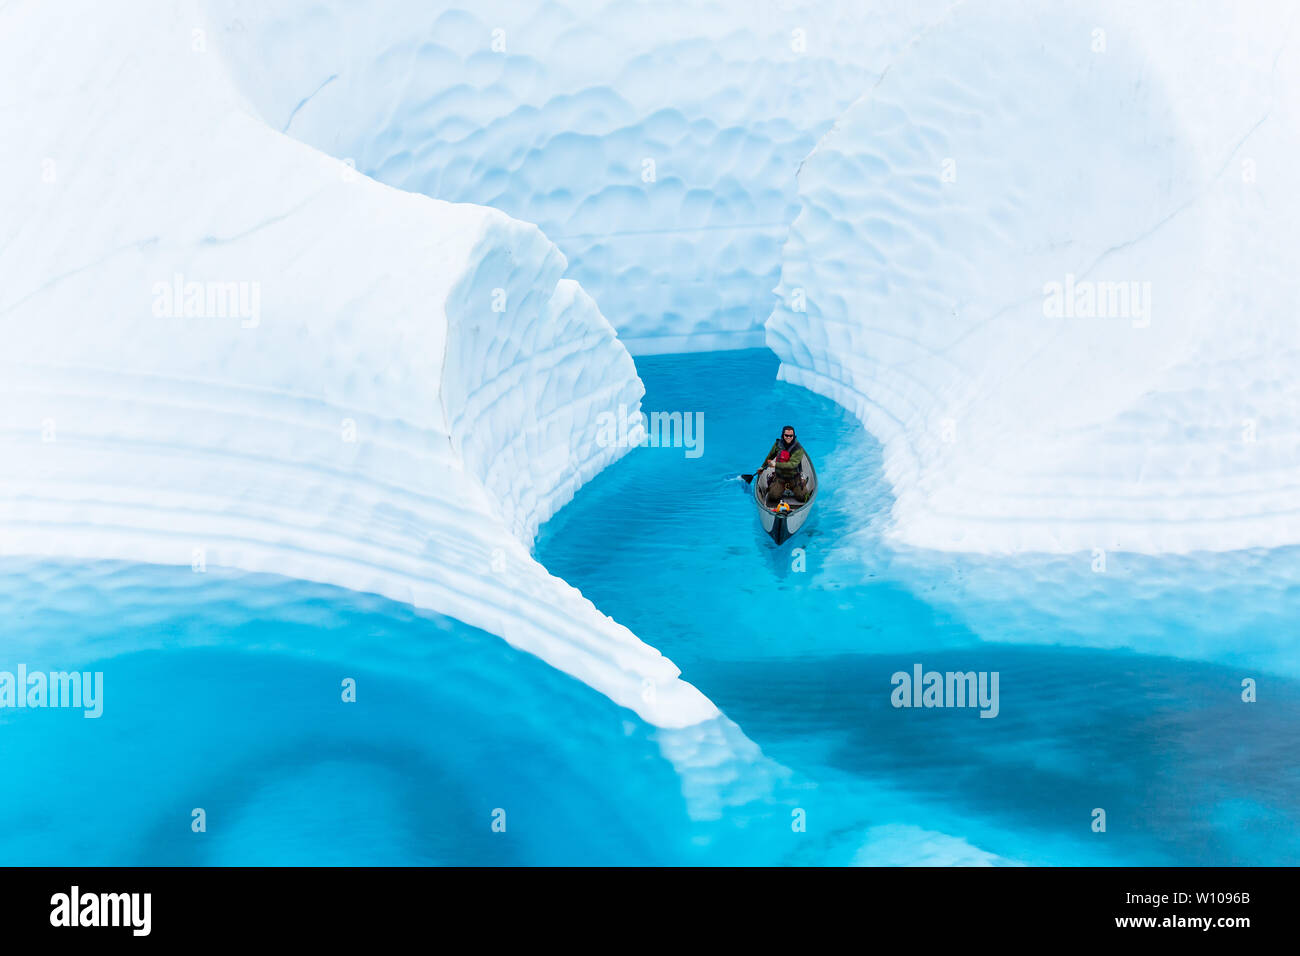 Tall walls of white glacier ice surround a young man in a boat, paddling the deep blue water of a supraglacial lake in remote Alaska. Stock Photo